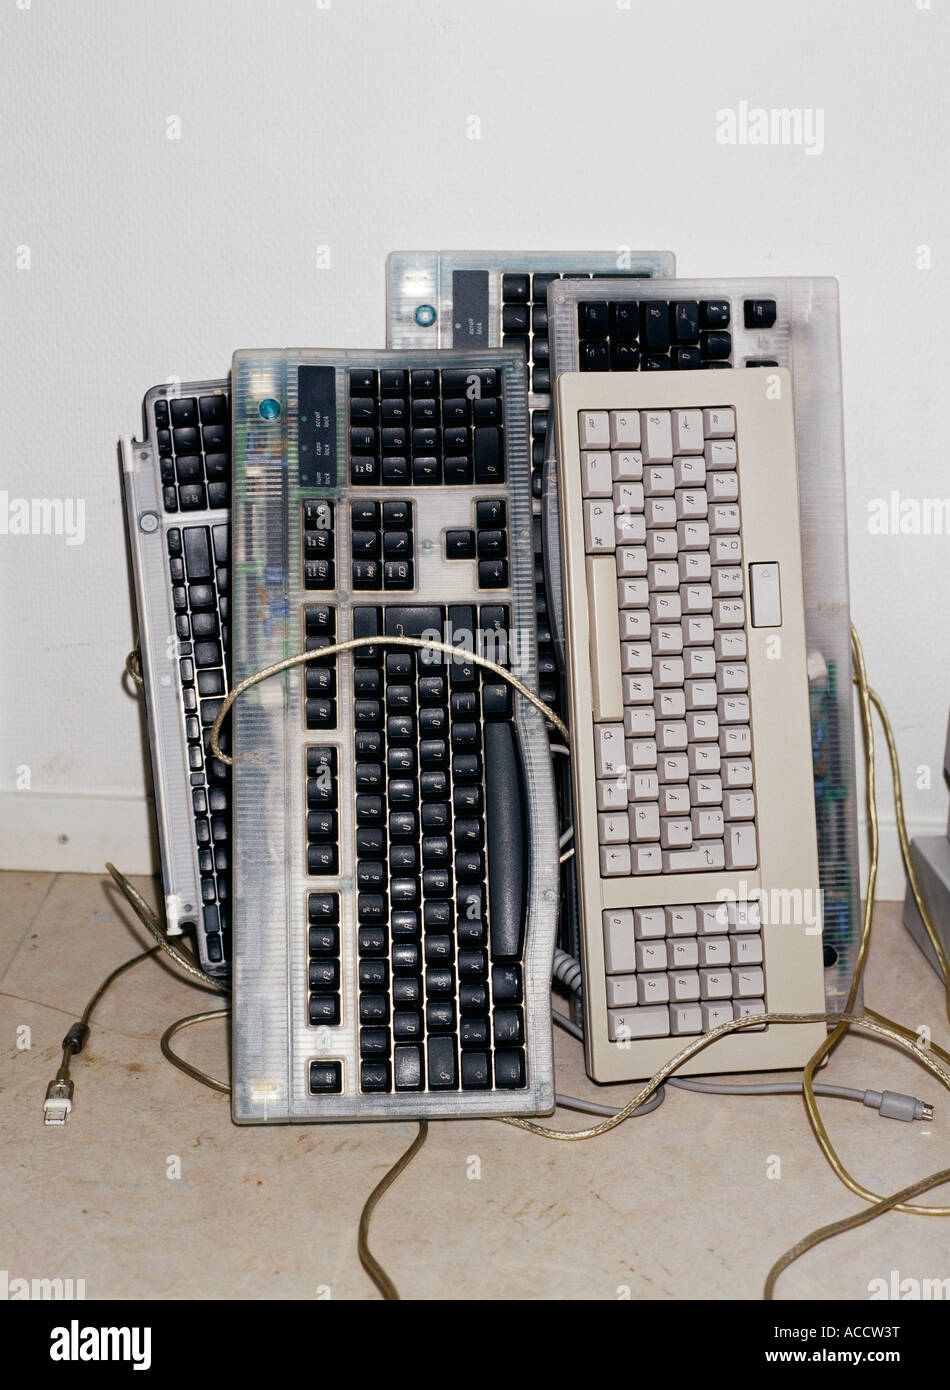 Different types of keyboards. Stock Photo